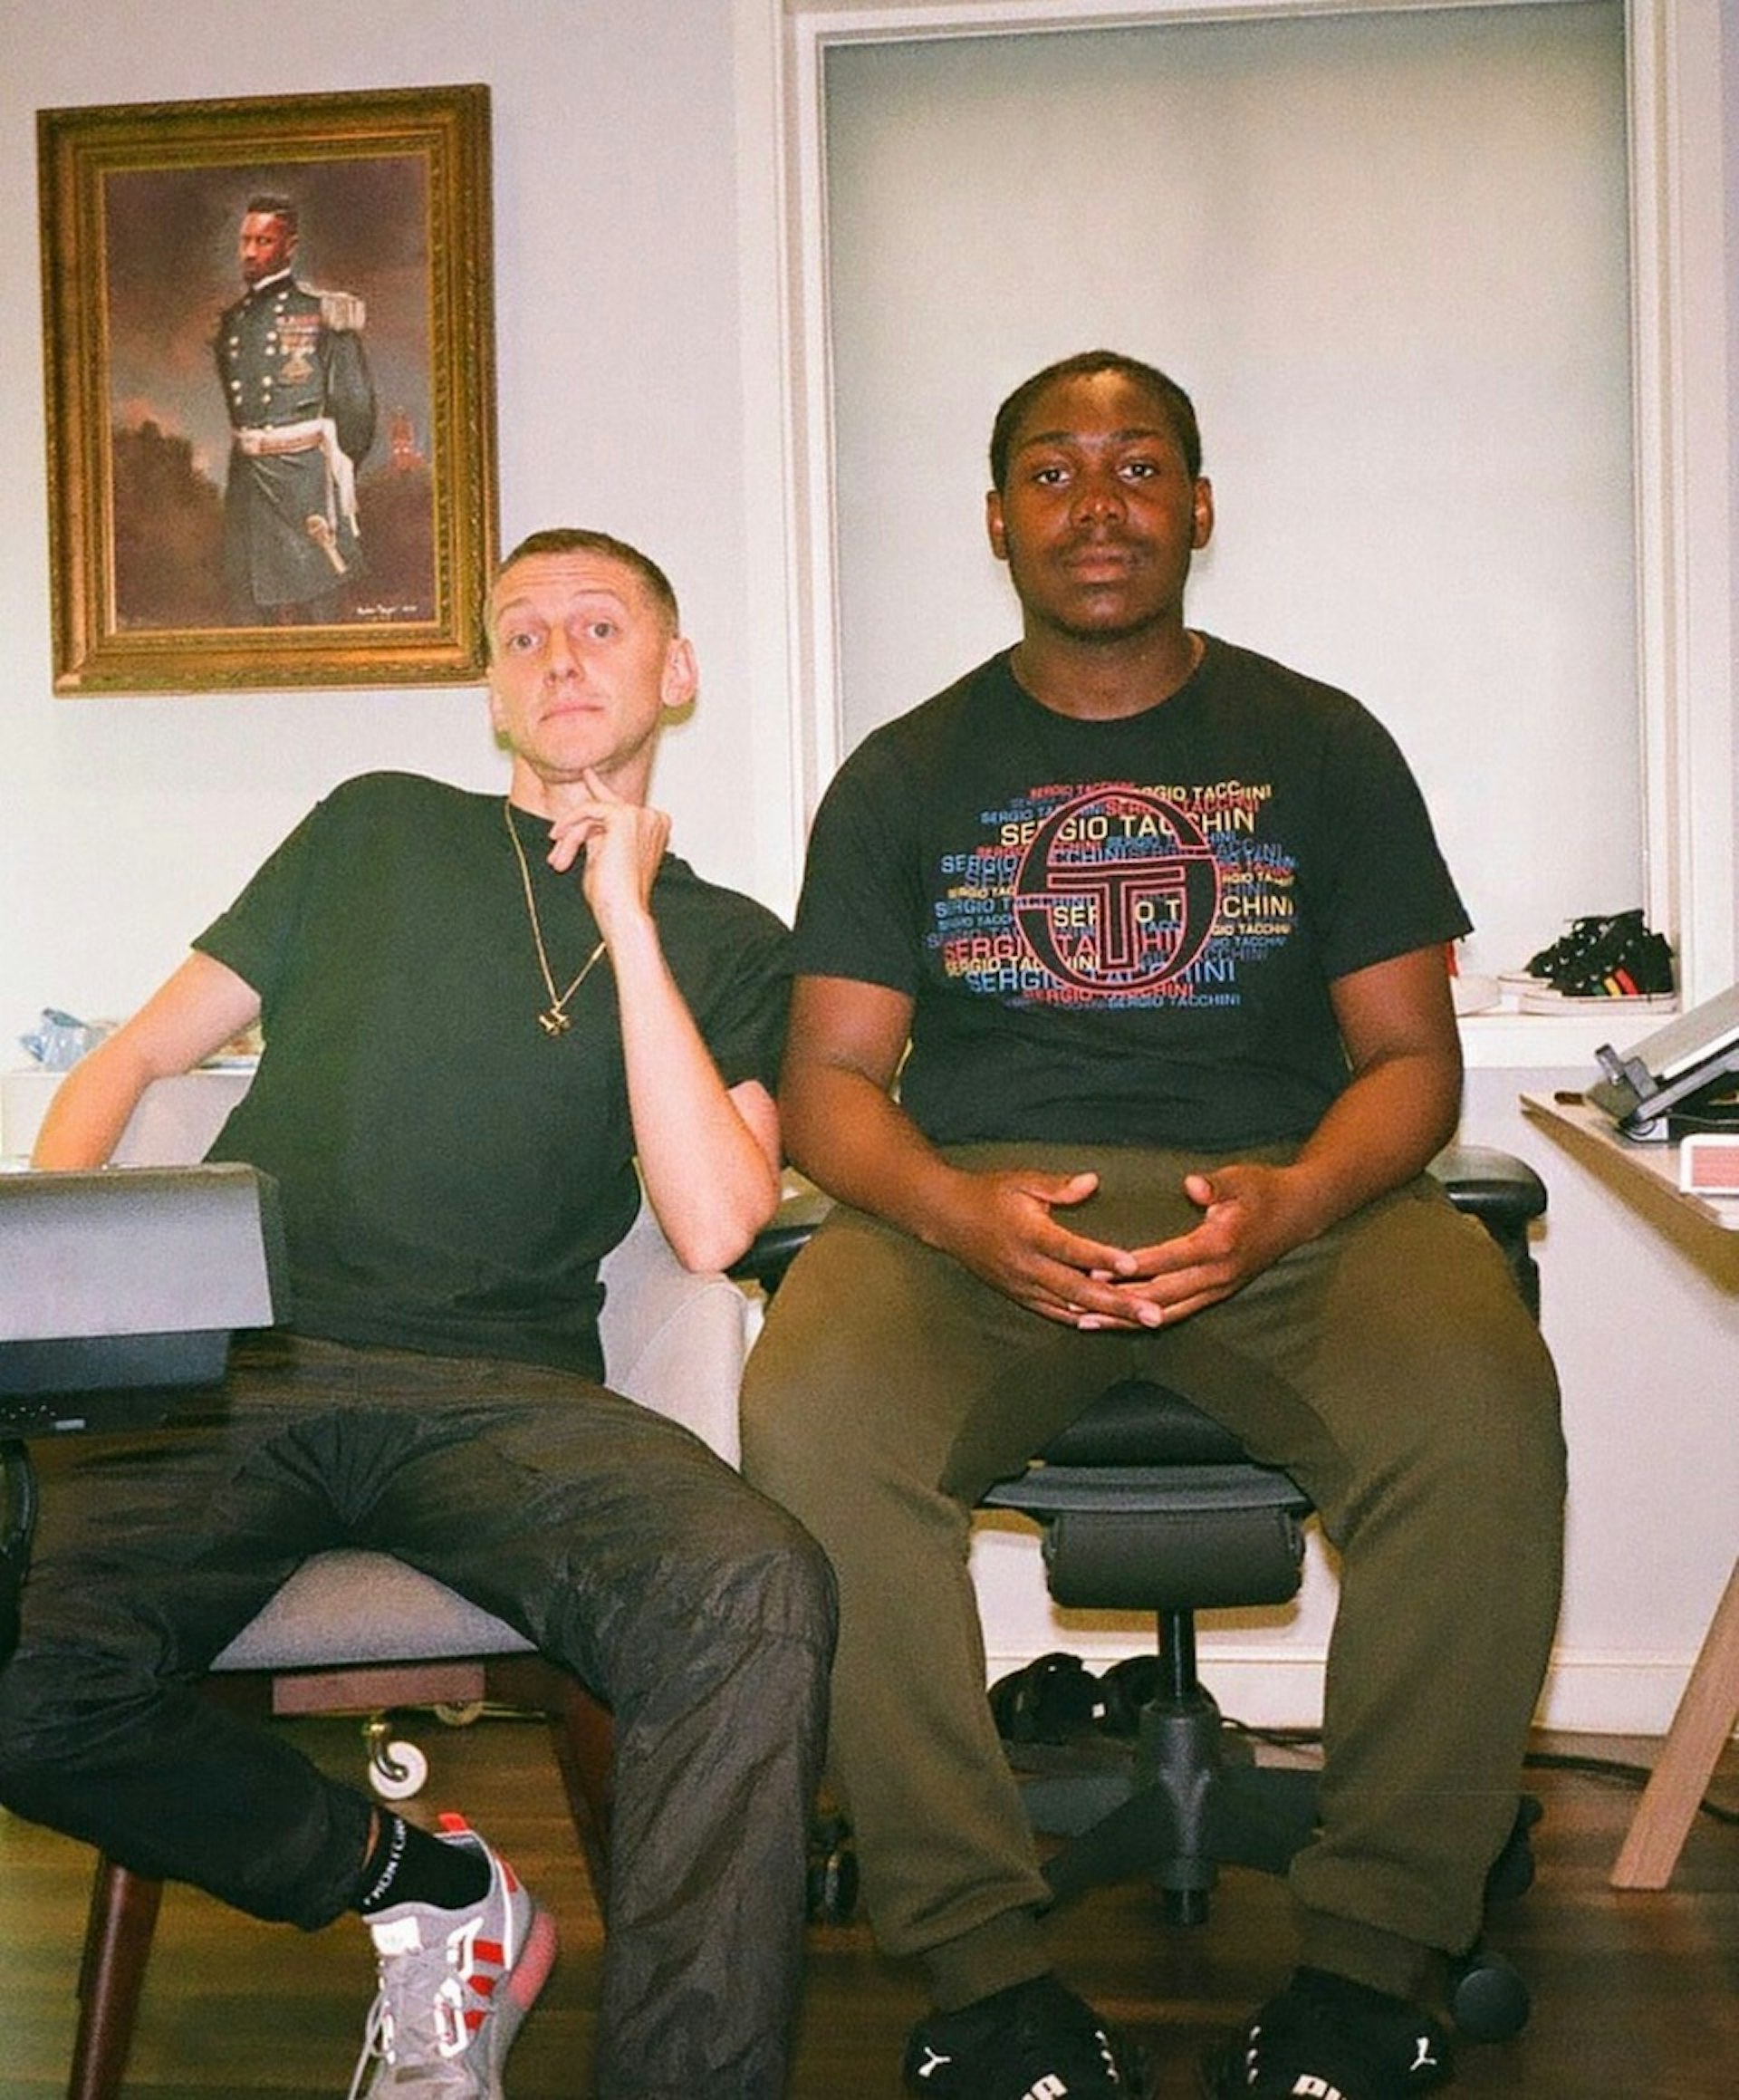 Toddla T and Rippa in the studio, by Ciaran Thapar.